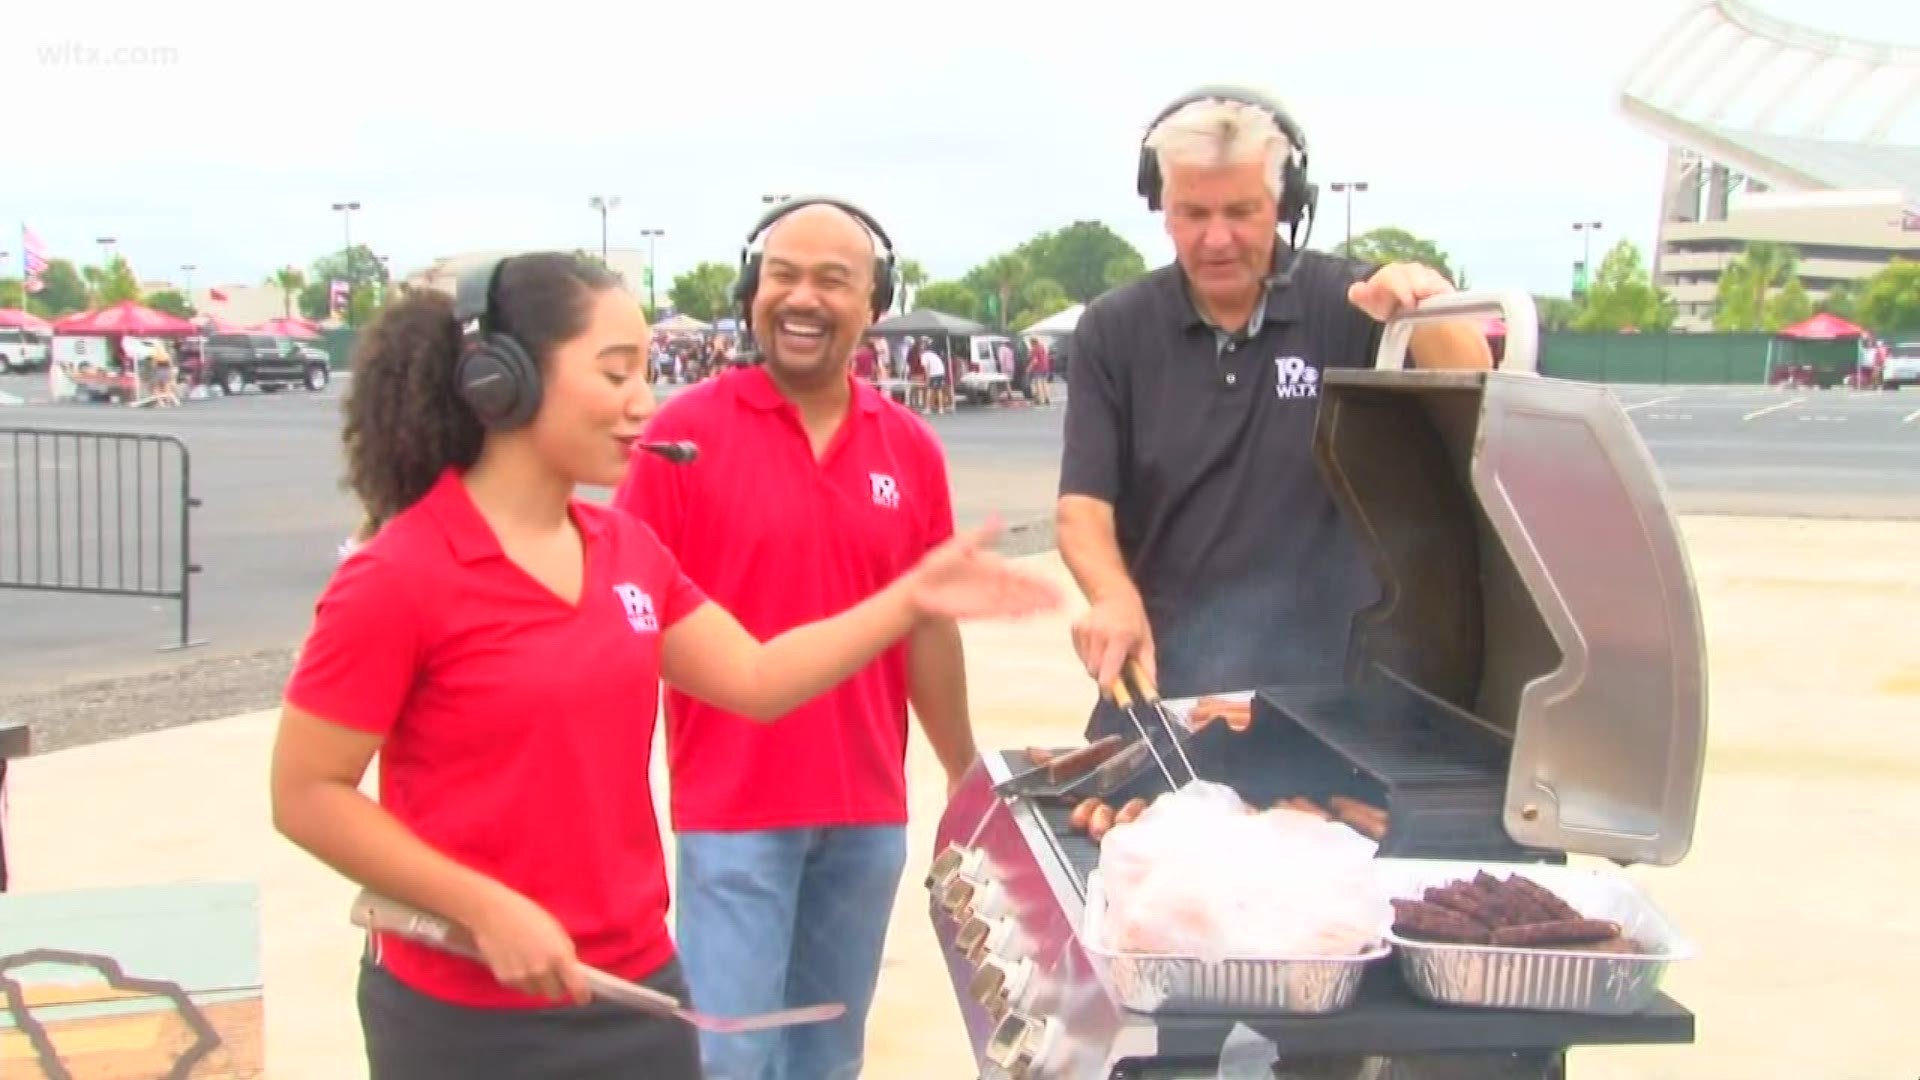 The News19 team heads out to Williams-Brice Stadium to host a tailgate special ahead of the USC Gamecocks football game against Alabama on Saturday, Sept. 14.